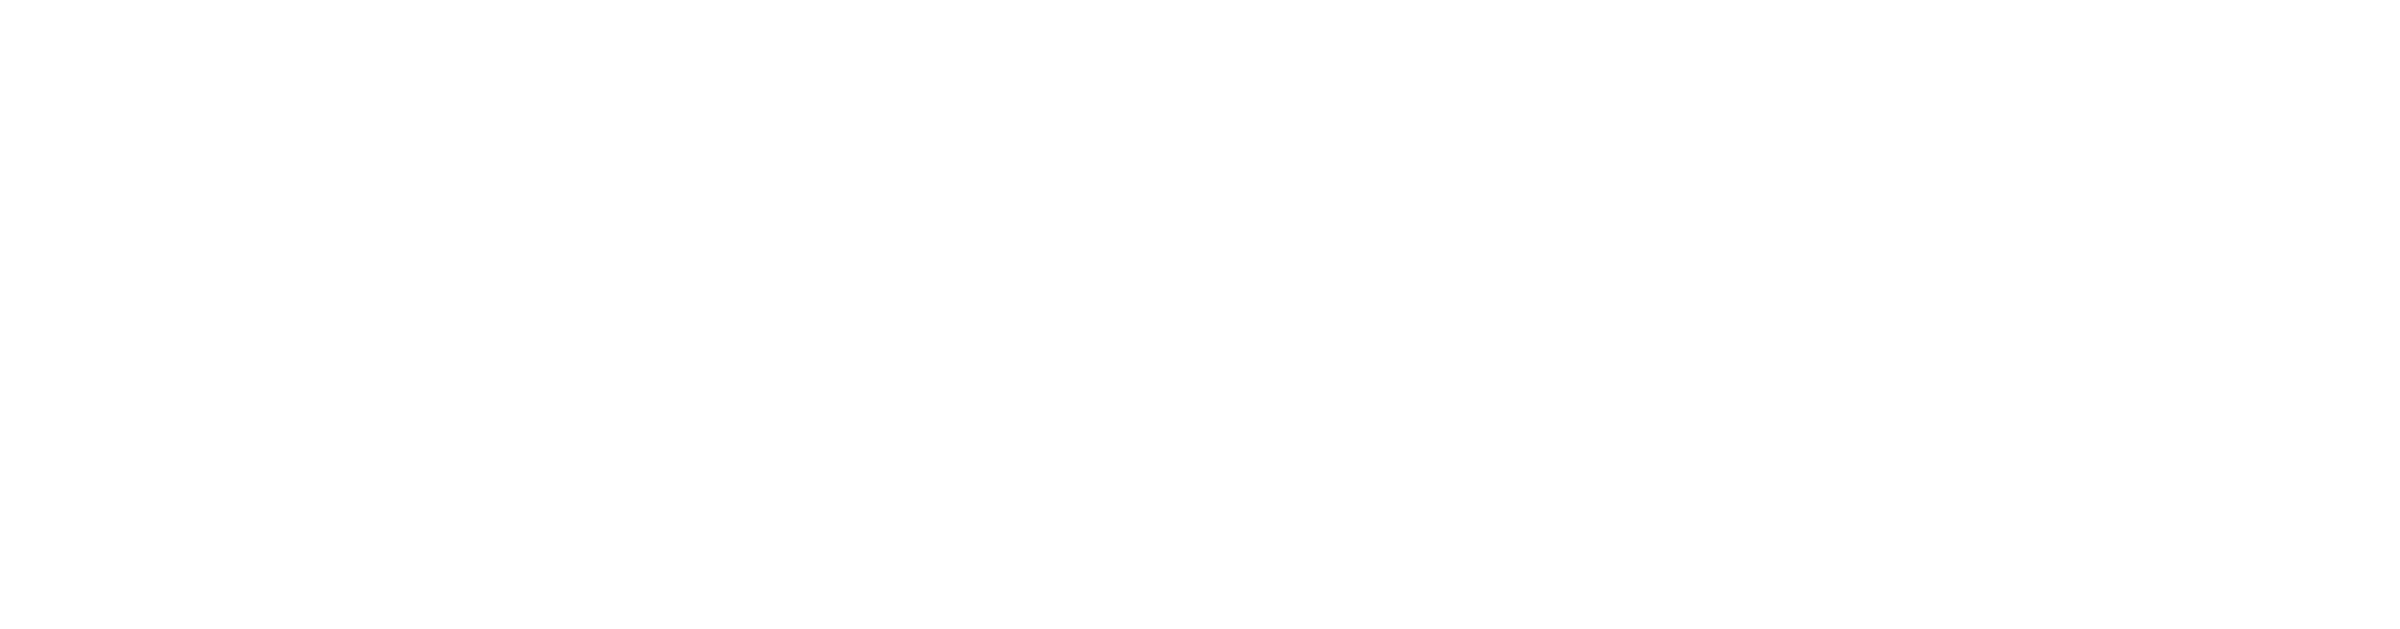 Relocation of the Air Traffic Control Tower (ATCT)